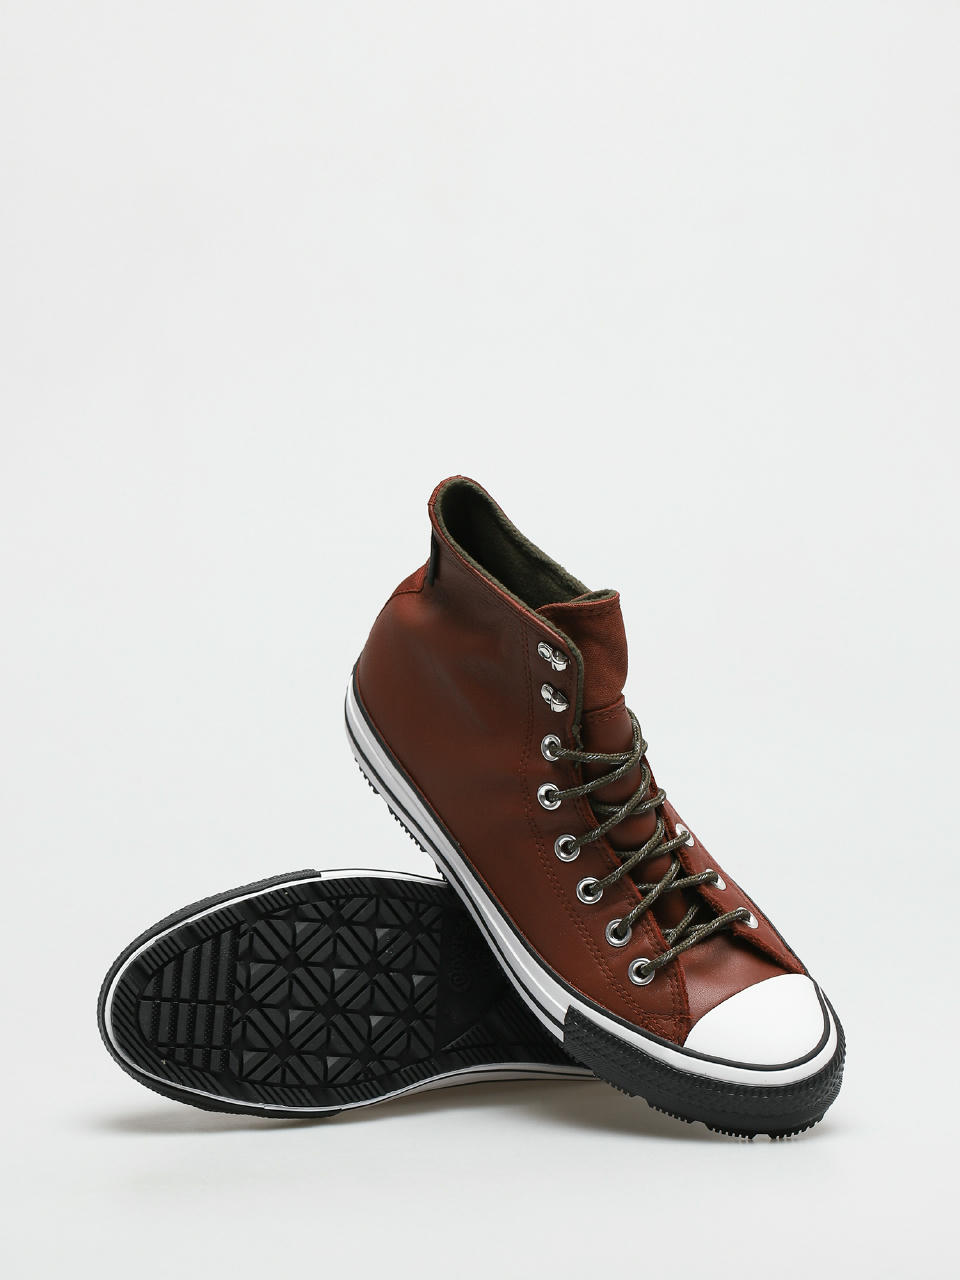 Converse Chuck Taylor Star Winter WP Shoes (brown/red)